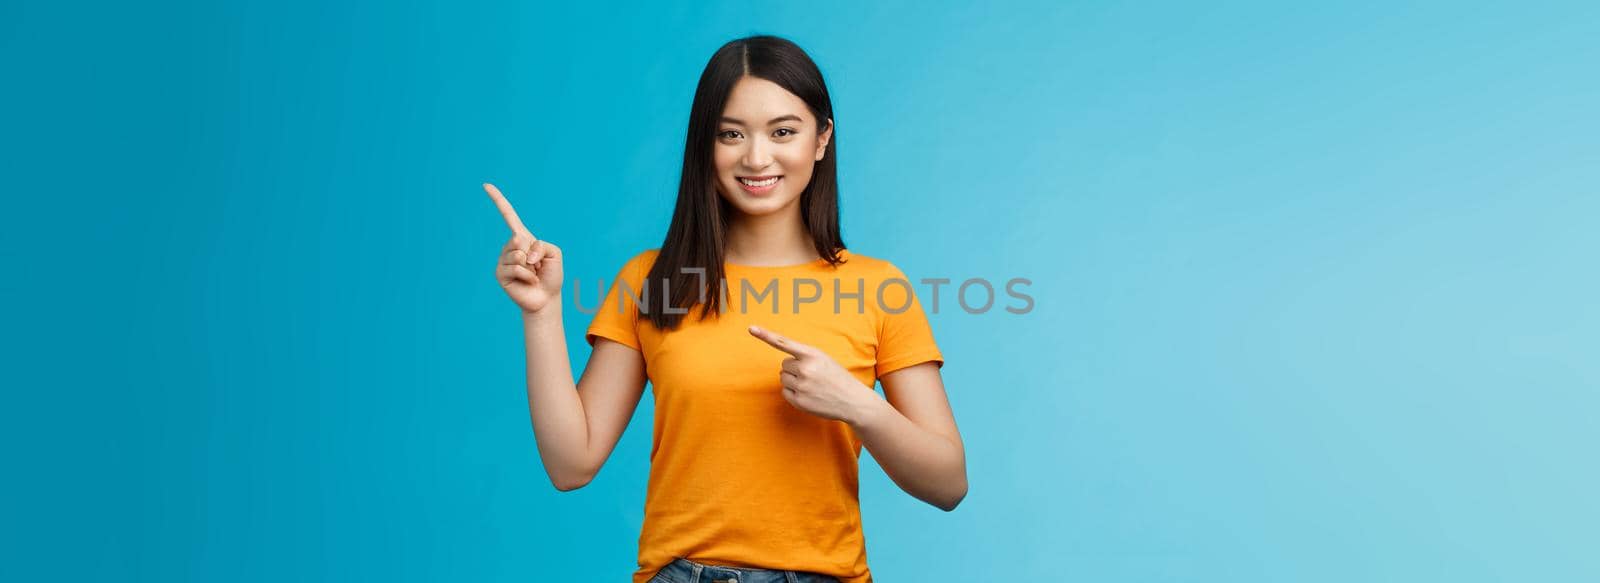 Friendly cheerful asian brunette girl inviting visit link interesting place, pointing upper right corner smiling joyfully camera, telling you about good promotion, stand blue background upbeat.